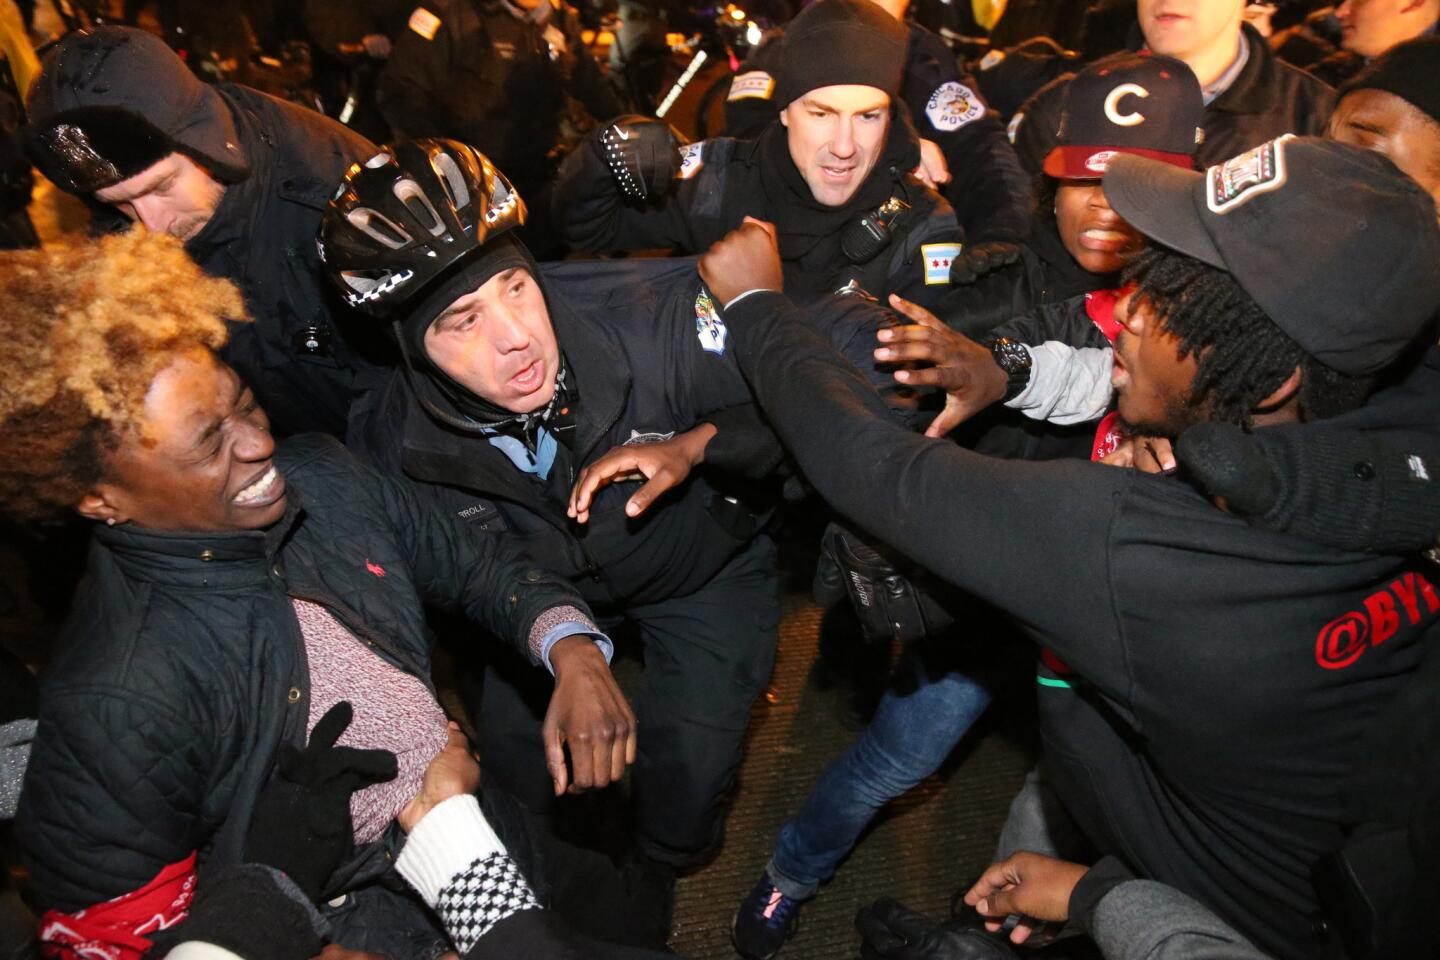 A scuffle breaks out as Chicago police try to stop protesters from crossing the Balbo Avenue bridge toward Columbus Drive on Nov. 24, 2015. The protests came after the city released a police dash-cam video showing black teenager Laquan McDonald being fatally shot by a Chicago police officer.